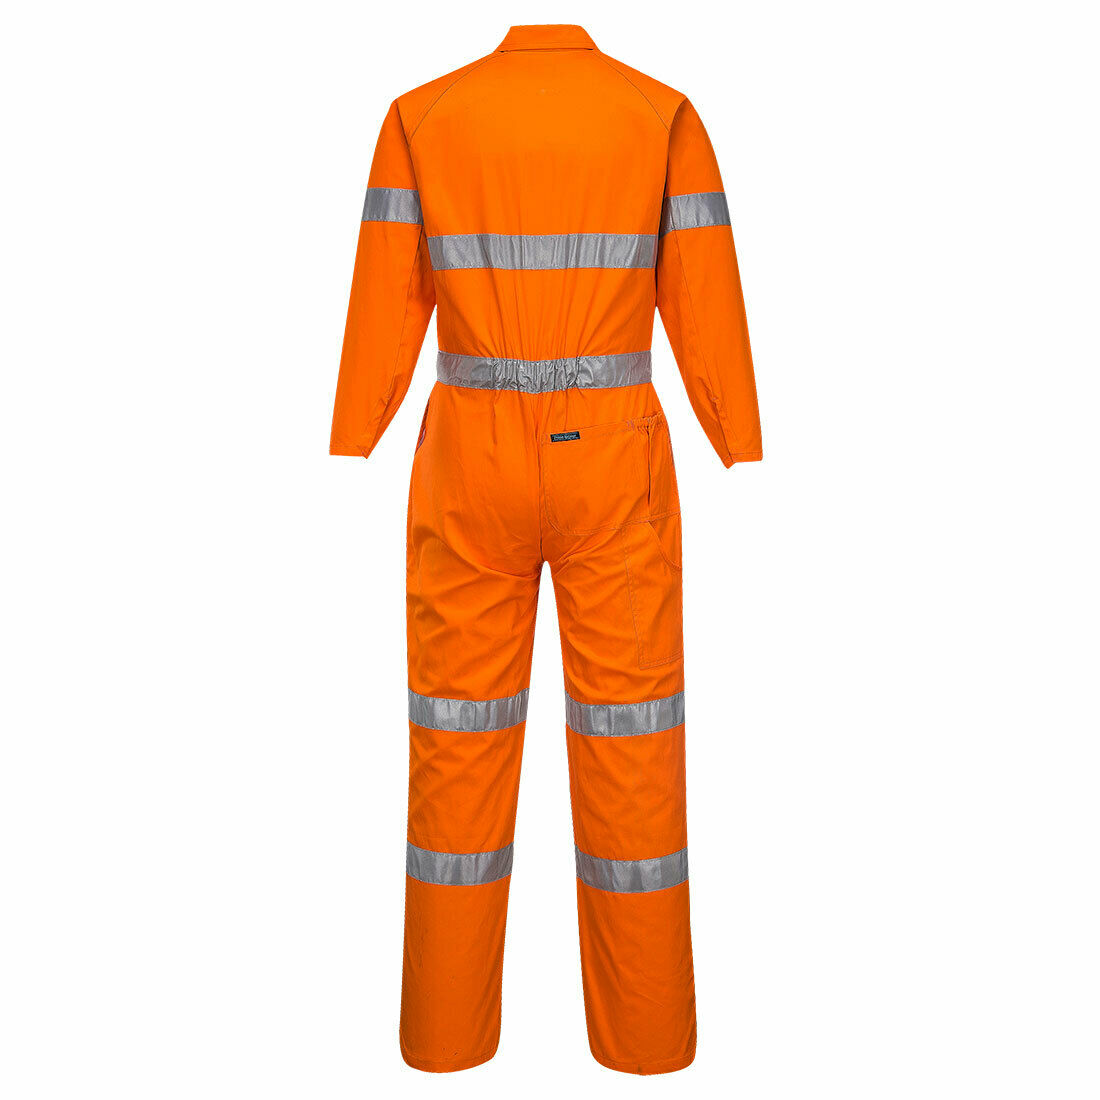 Portwest Mens Lightweight Orange Reinforced Coverall Taped Overalls Cotton MA922